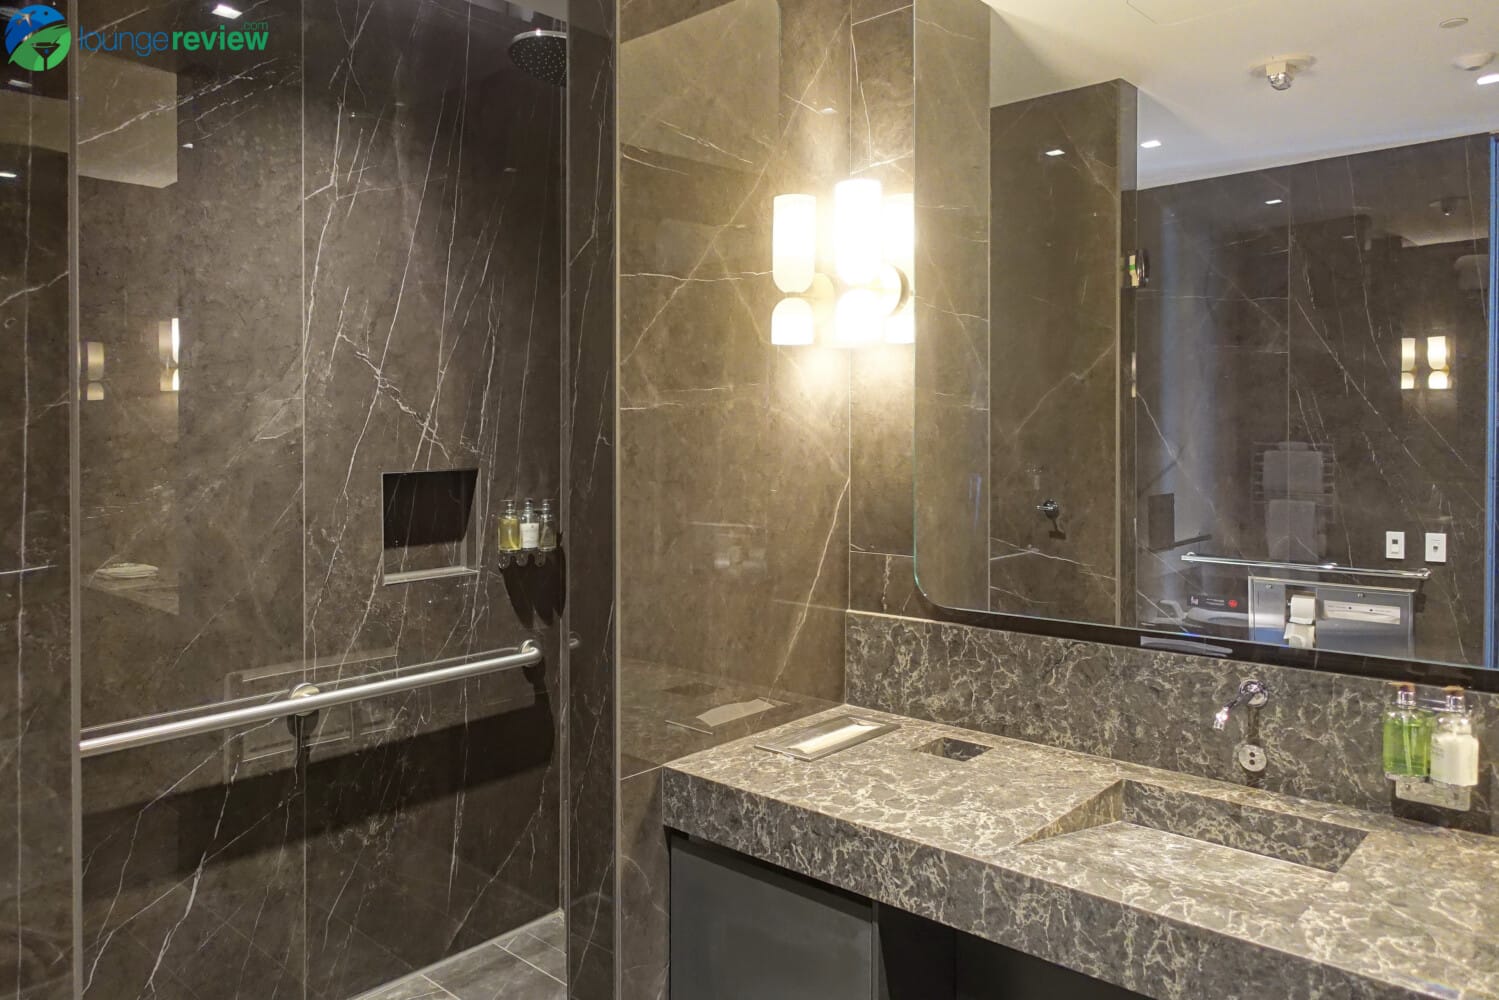 The Air Canada Maple Leaf Lounge SFO has two elegant shower suites